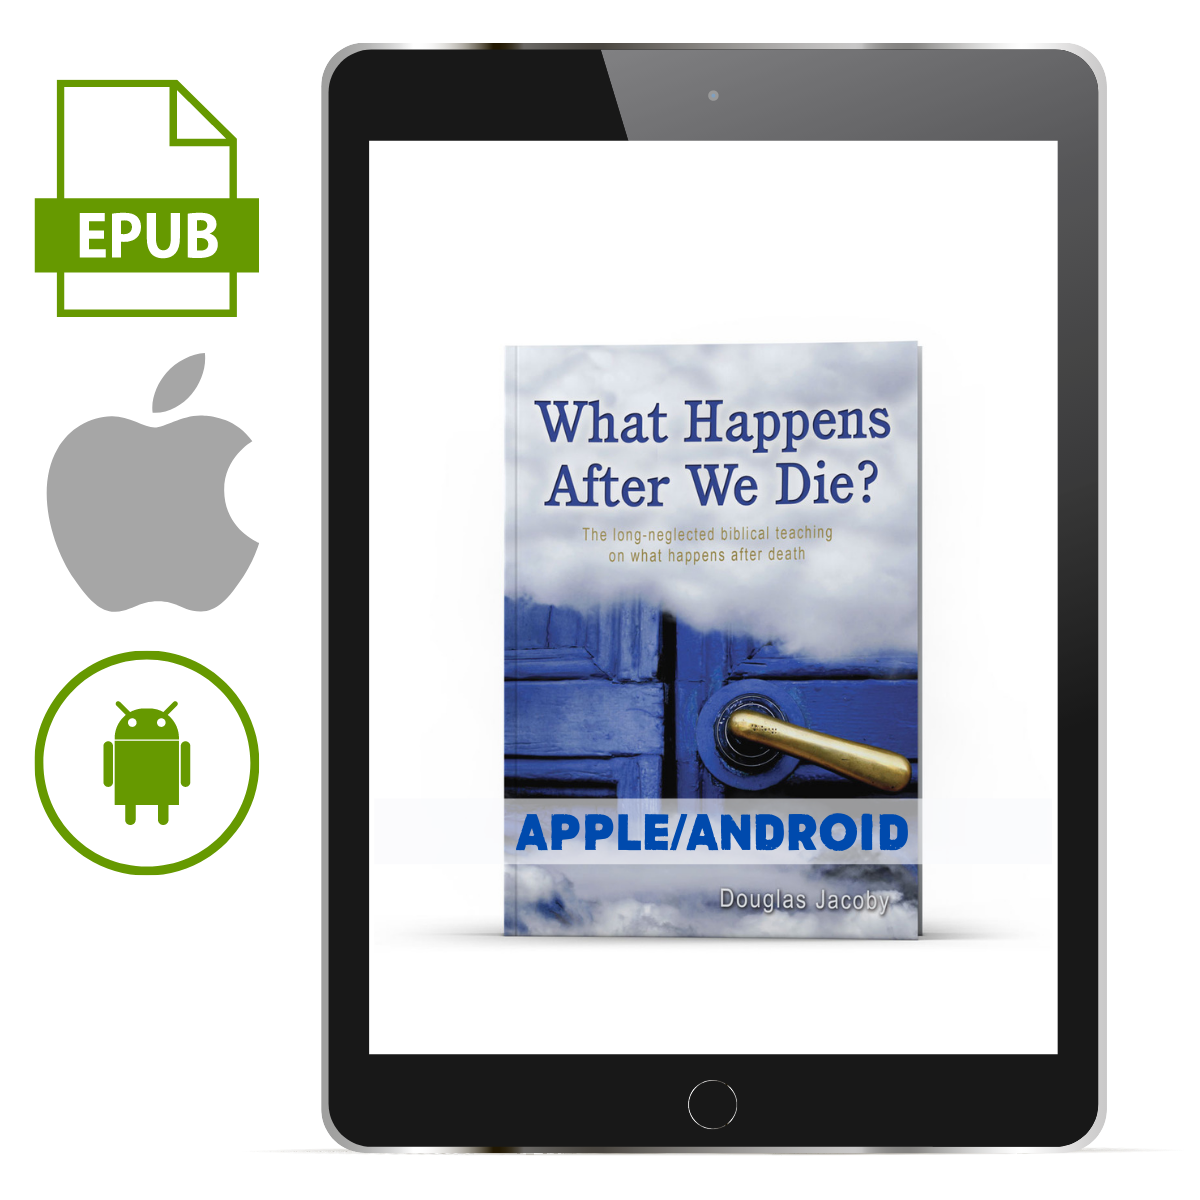 What Happens After We Die? The long-neglected biblical teaching on what happens after death Apple/Android - Illumination Publishers